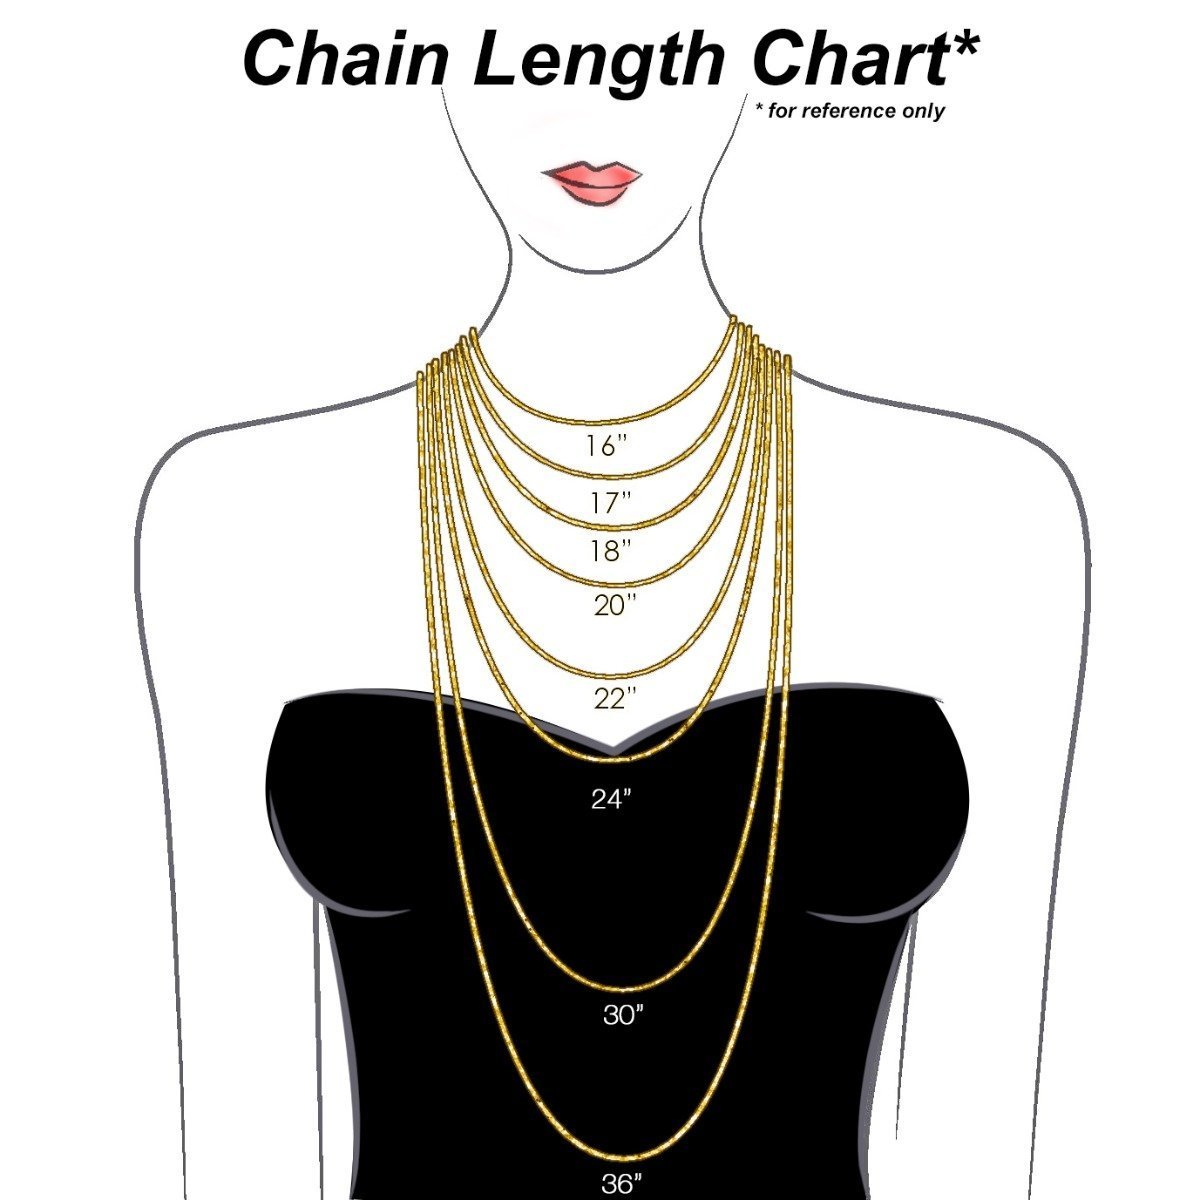 14KT Gold 1.55MM Rolo Chain Necklace - 4 Lengths Available 16 Inch / White,16 Inch / Yellow,18 Inch / White,18 Inch / Yellow,20 Inch / White,20 Inch / Yellow,24 Inch / White,24 Inch / Yellow